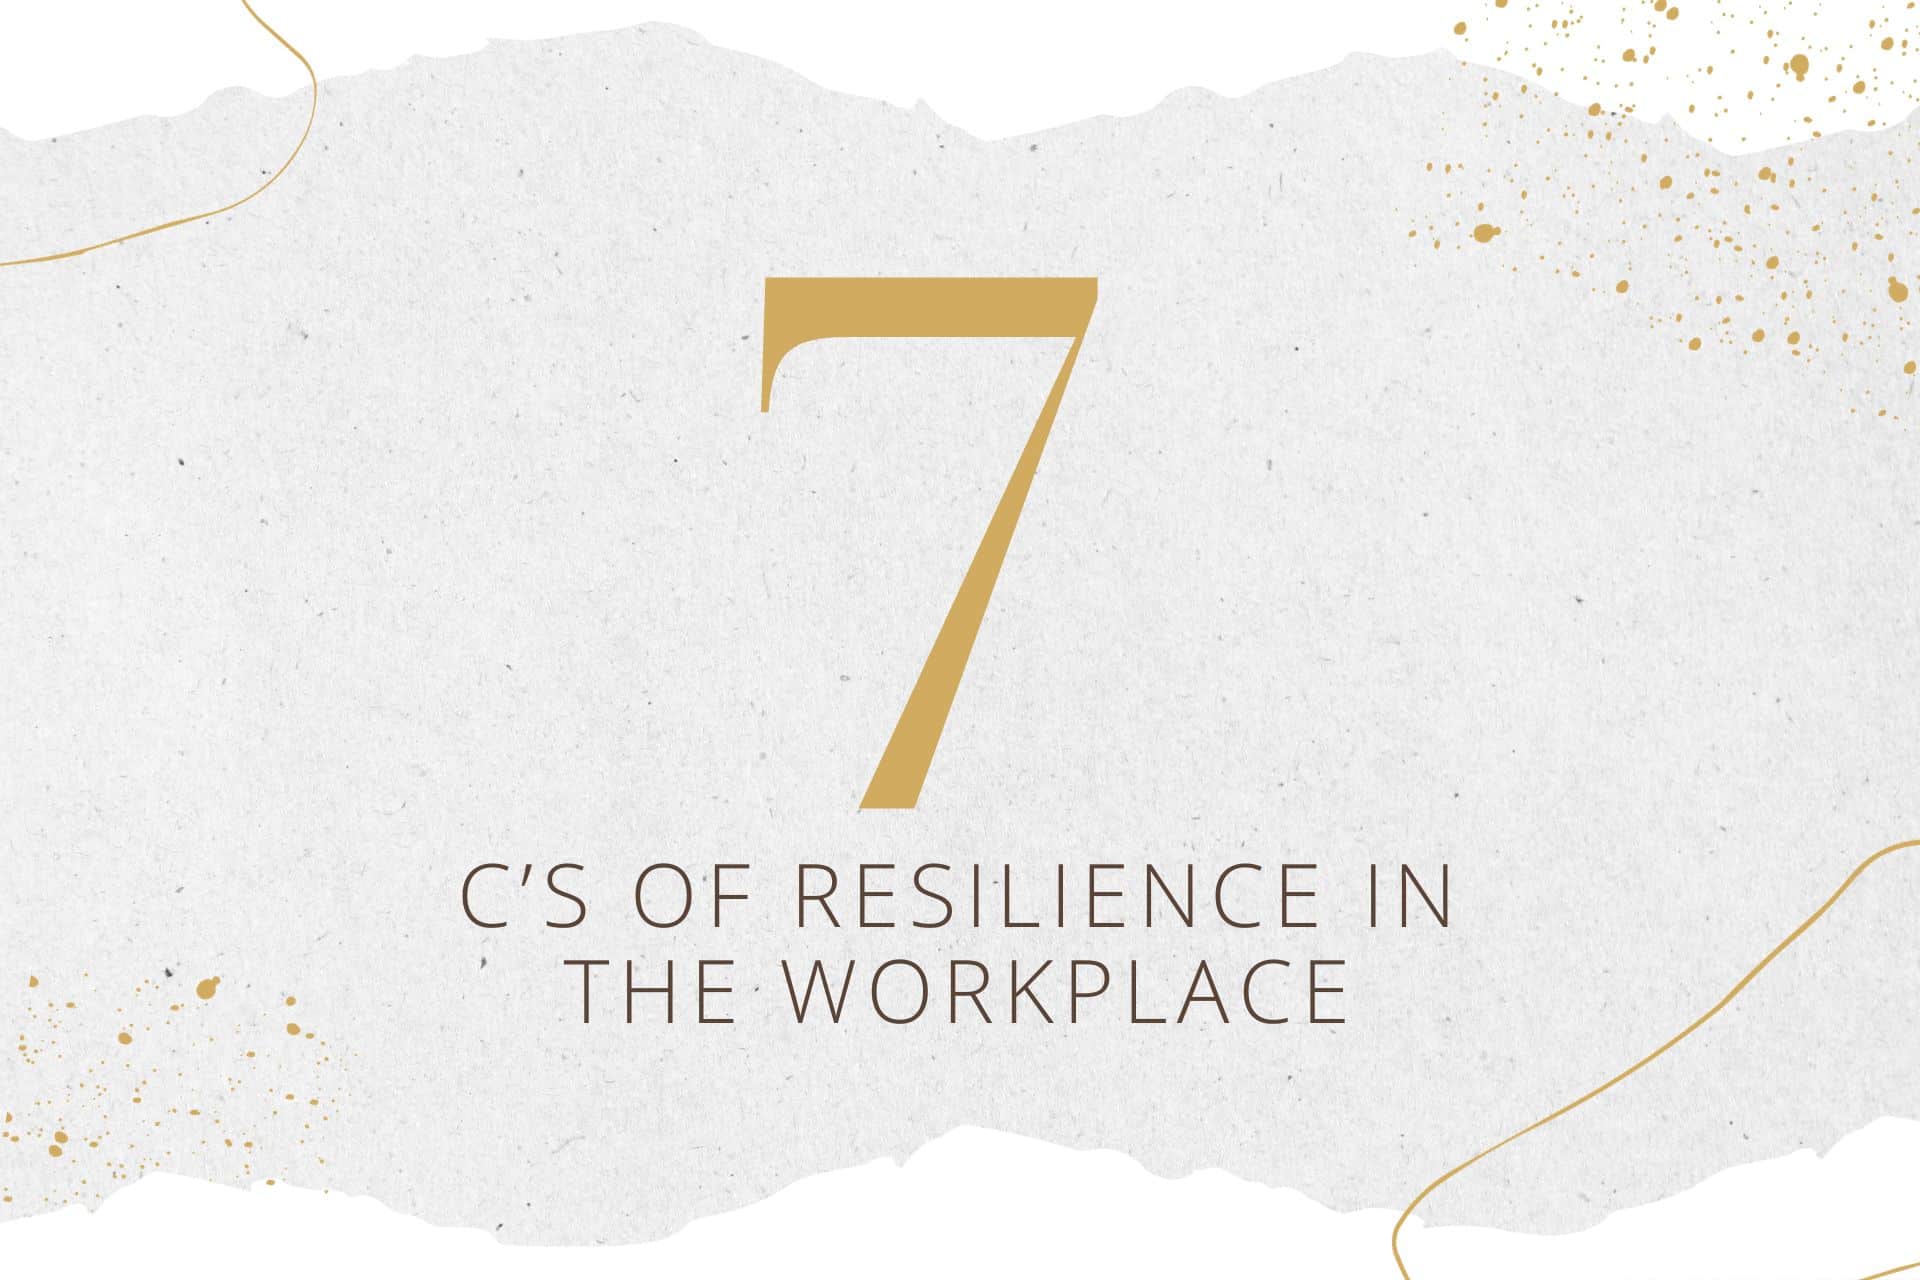 7 C's of resilience in the workplace